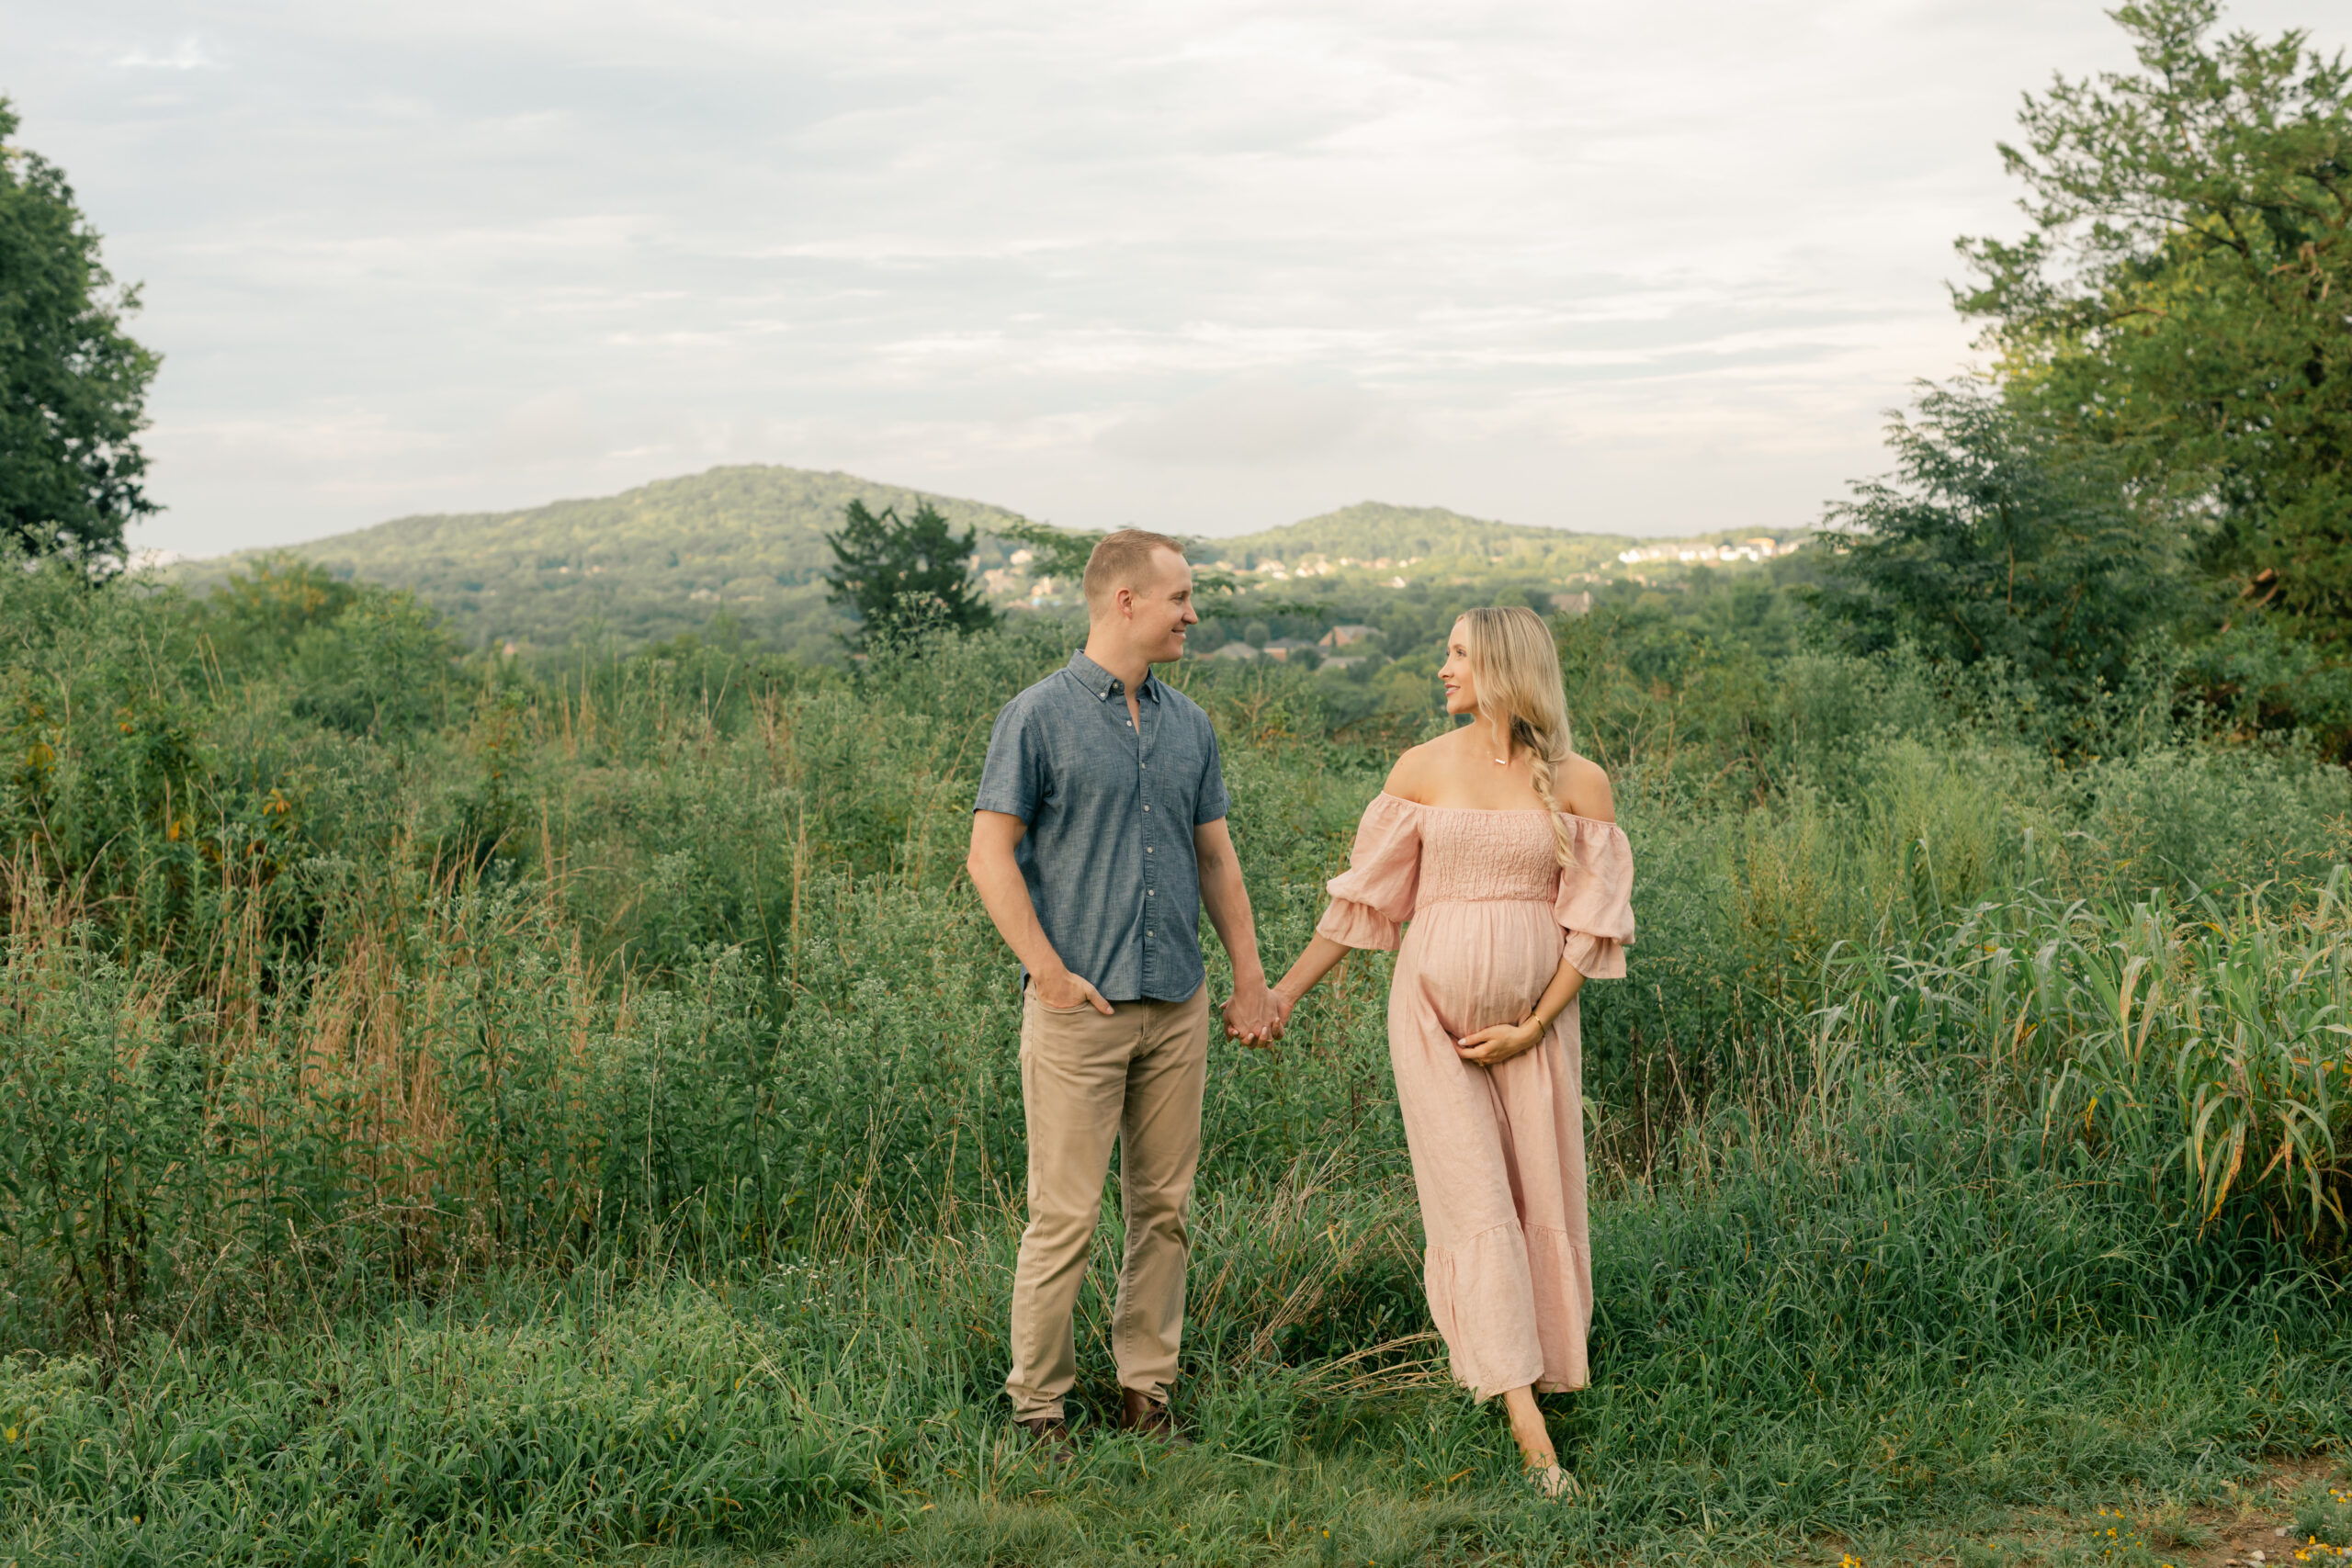 Outdoor Spring Maternity Session in Nashville TN. Mom and dad